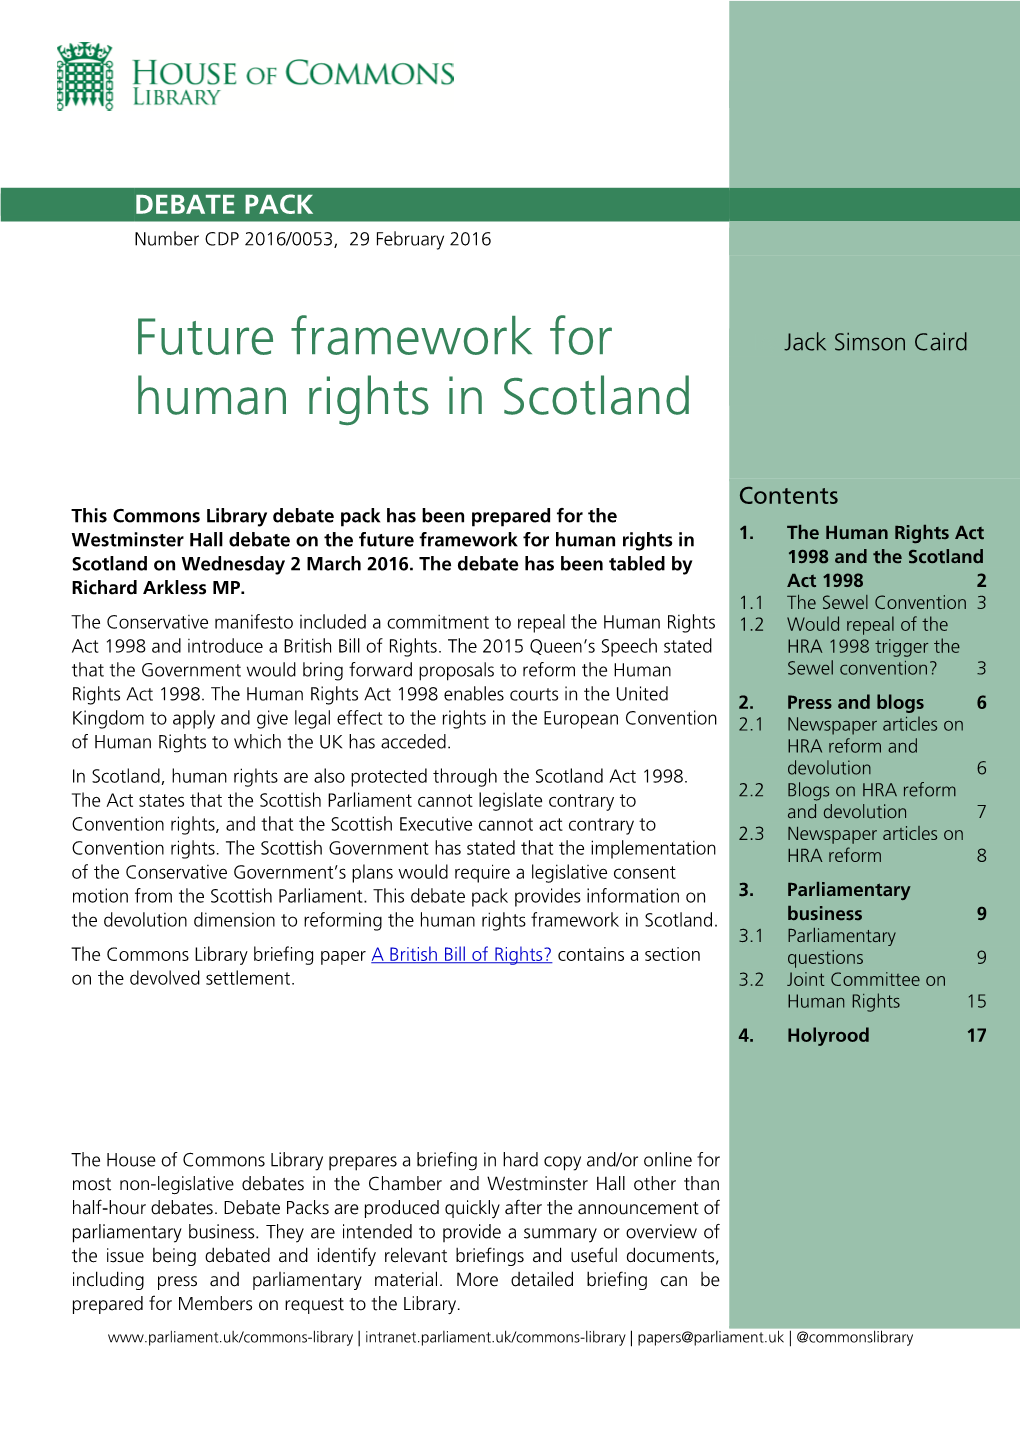 Future Framework for Human Rights in Scotland 3